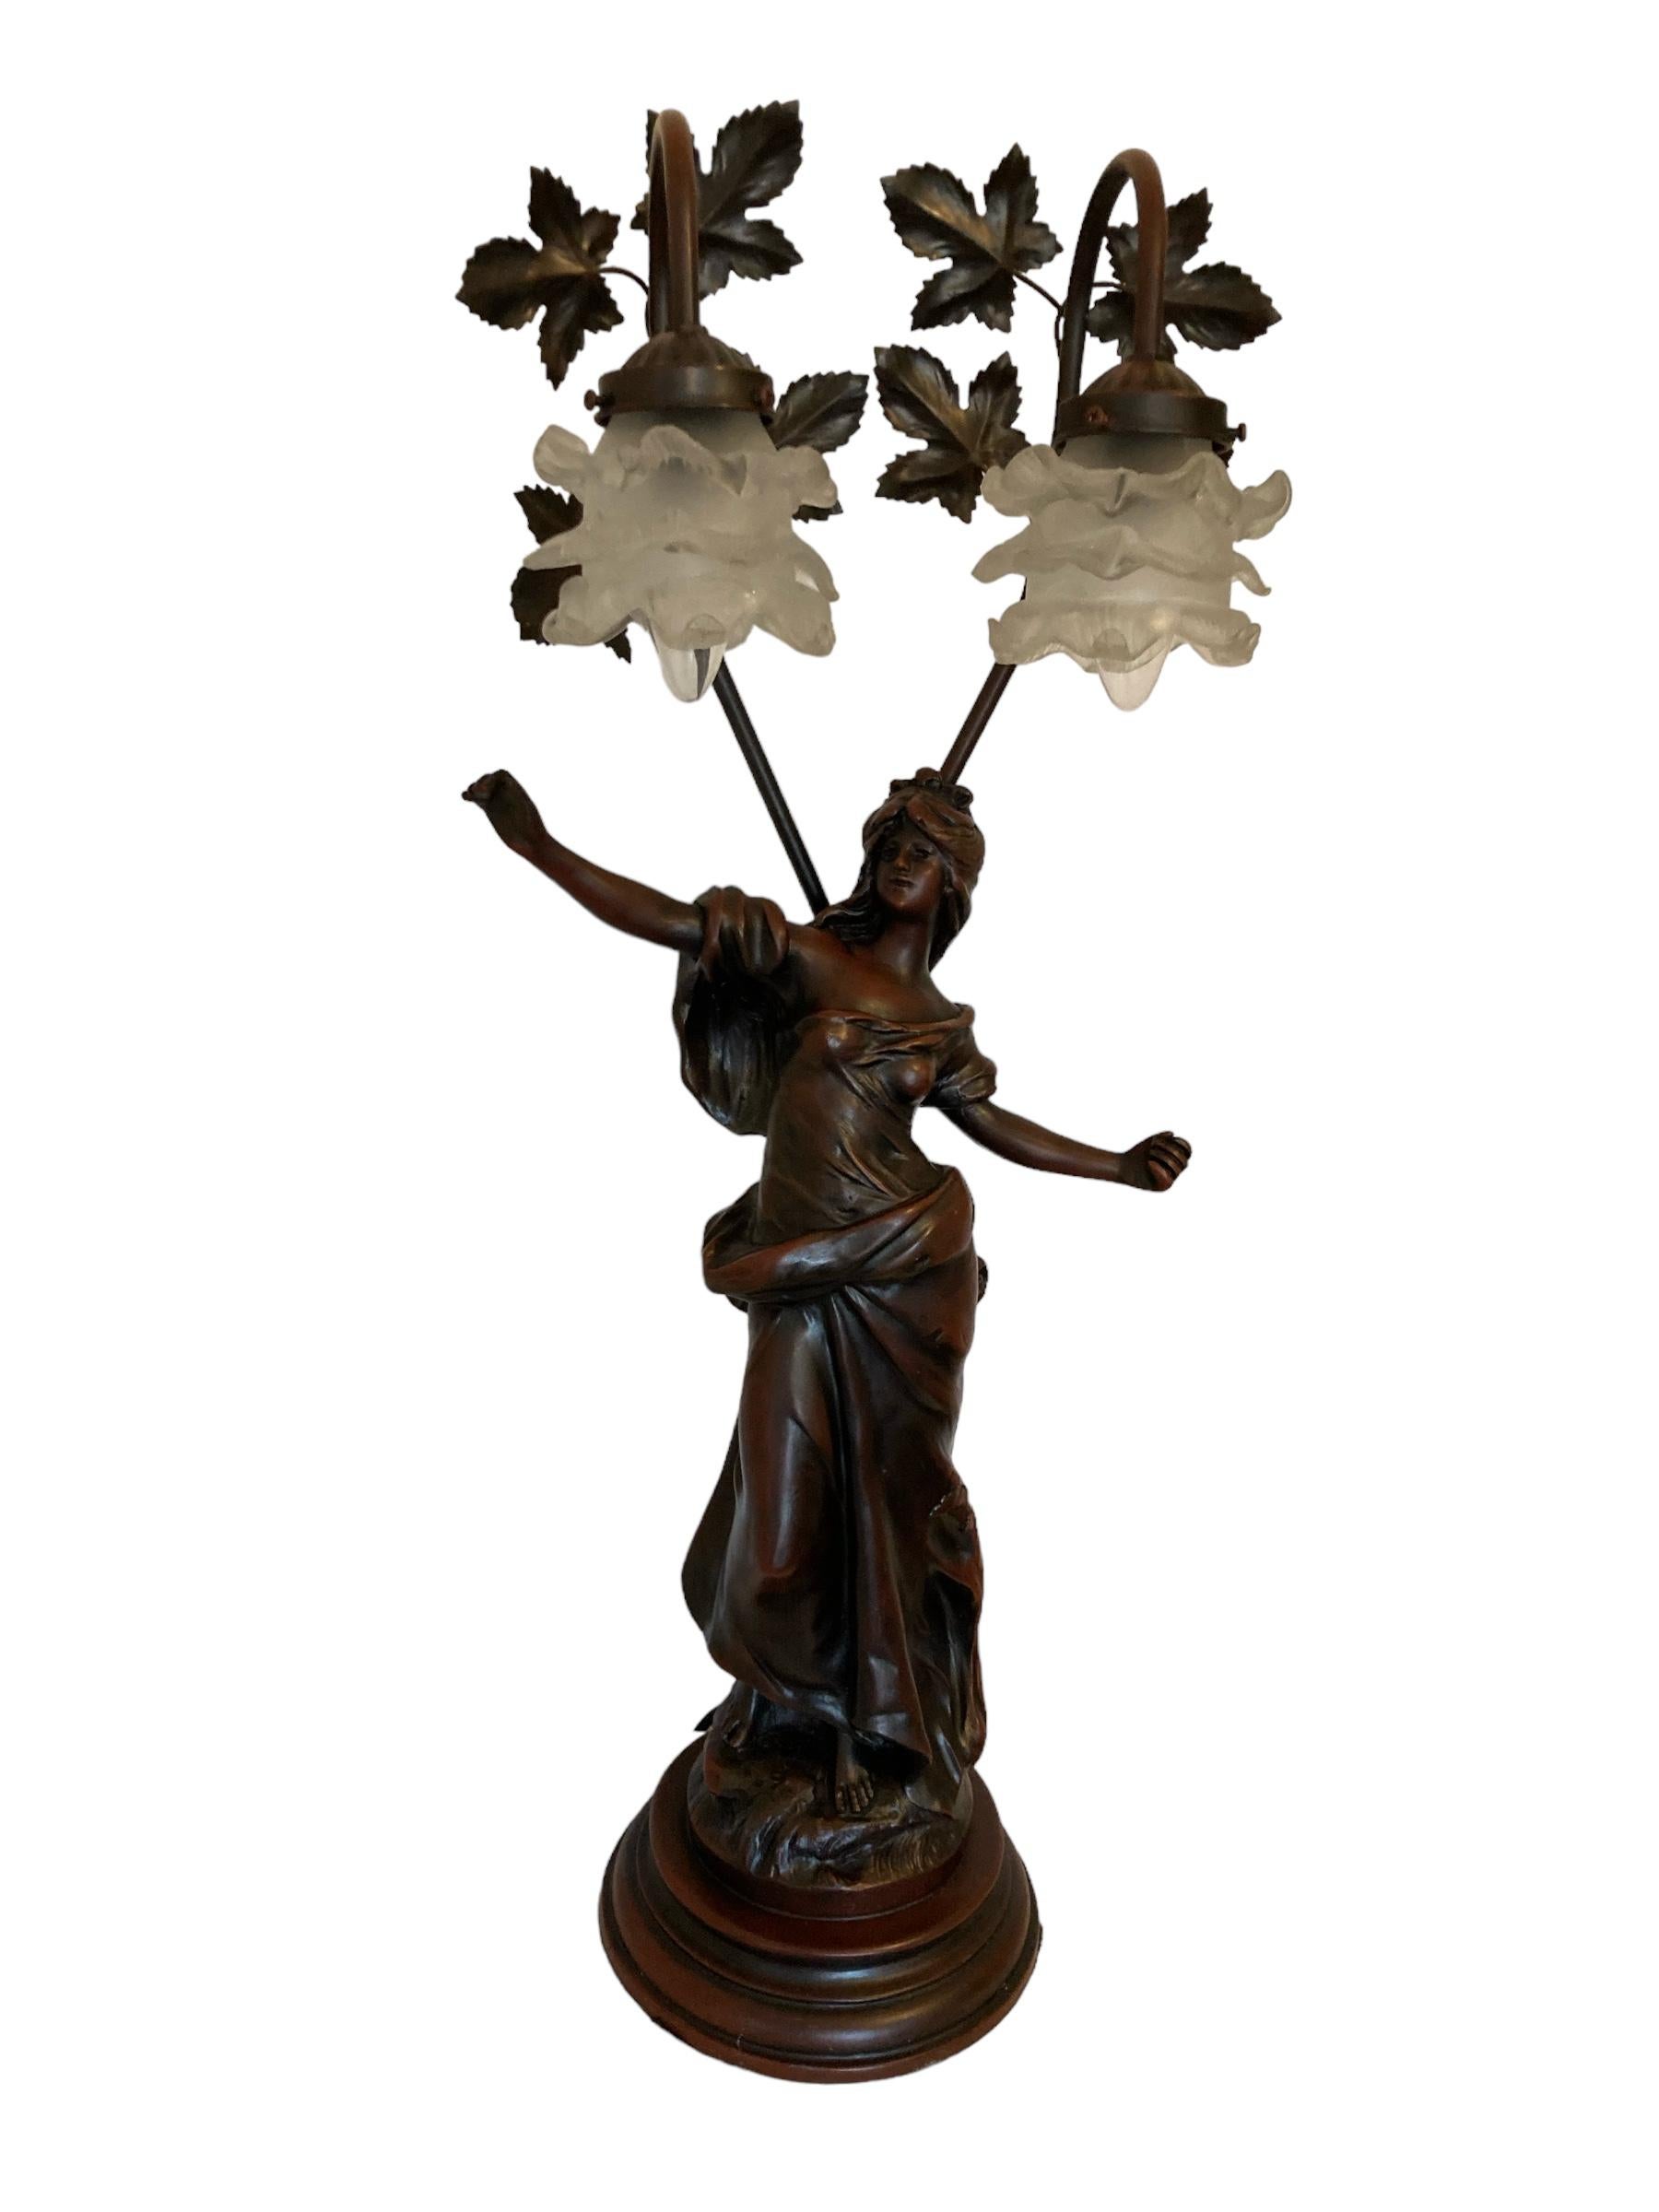 Vintage Auguste Moreau figural sculpture table lamp with glass shades. Sculpture is made of spelter, with an antique bronze finish. Sculptures by Louis Auguste Moreau (1855-1919) who, together with his brother Hippolyte Francois Moreau, produced